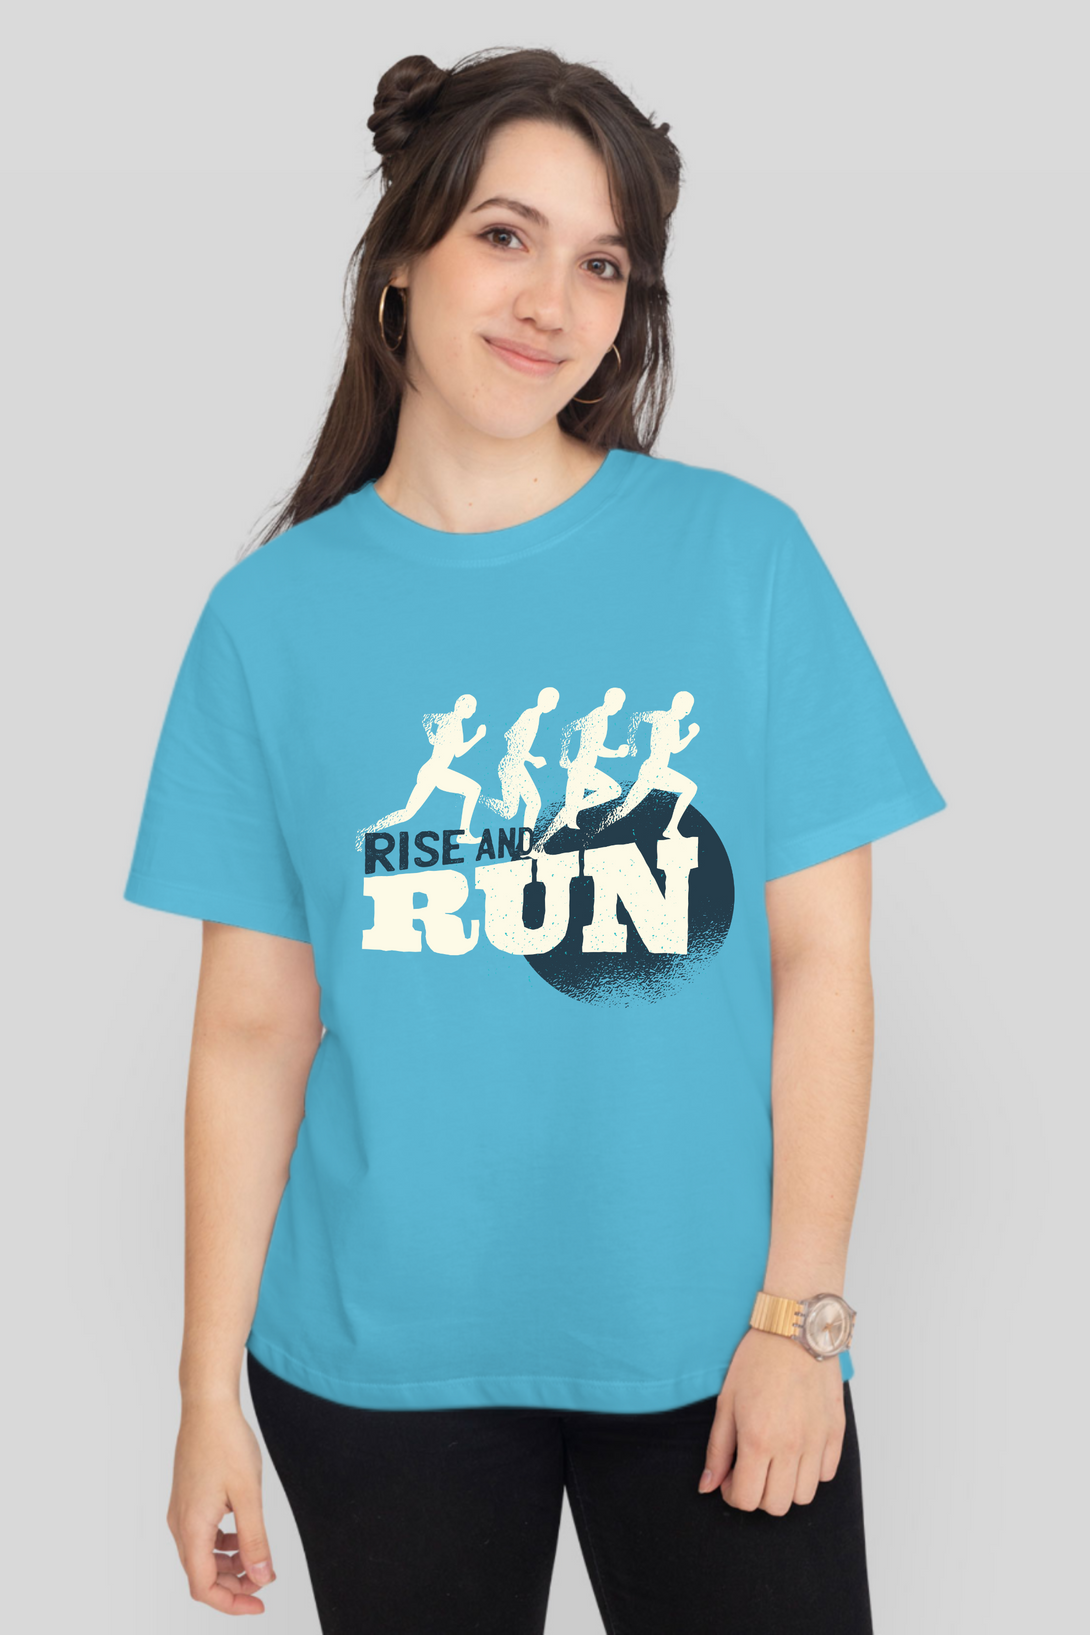 Rise And Run Printed T-Shirt For Women - WowWaves - 8